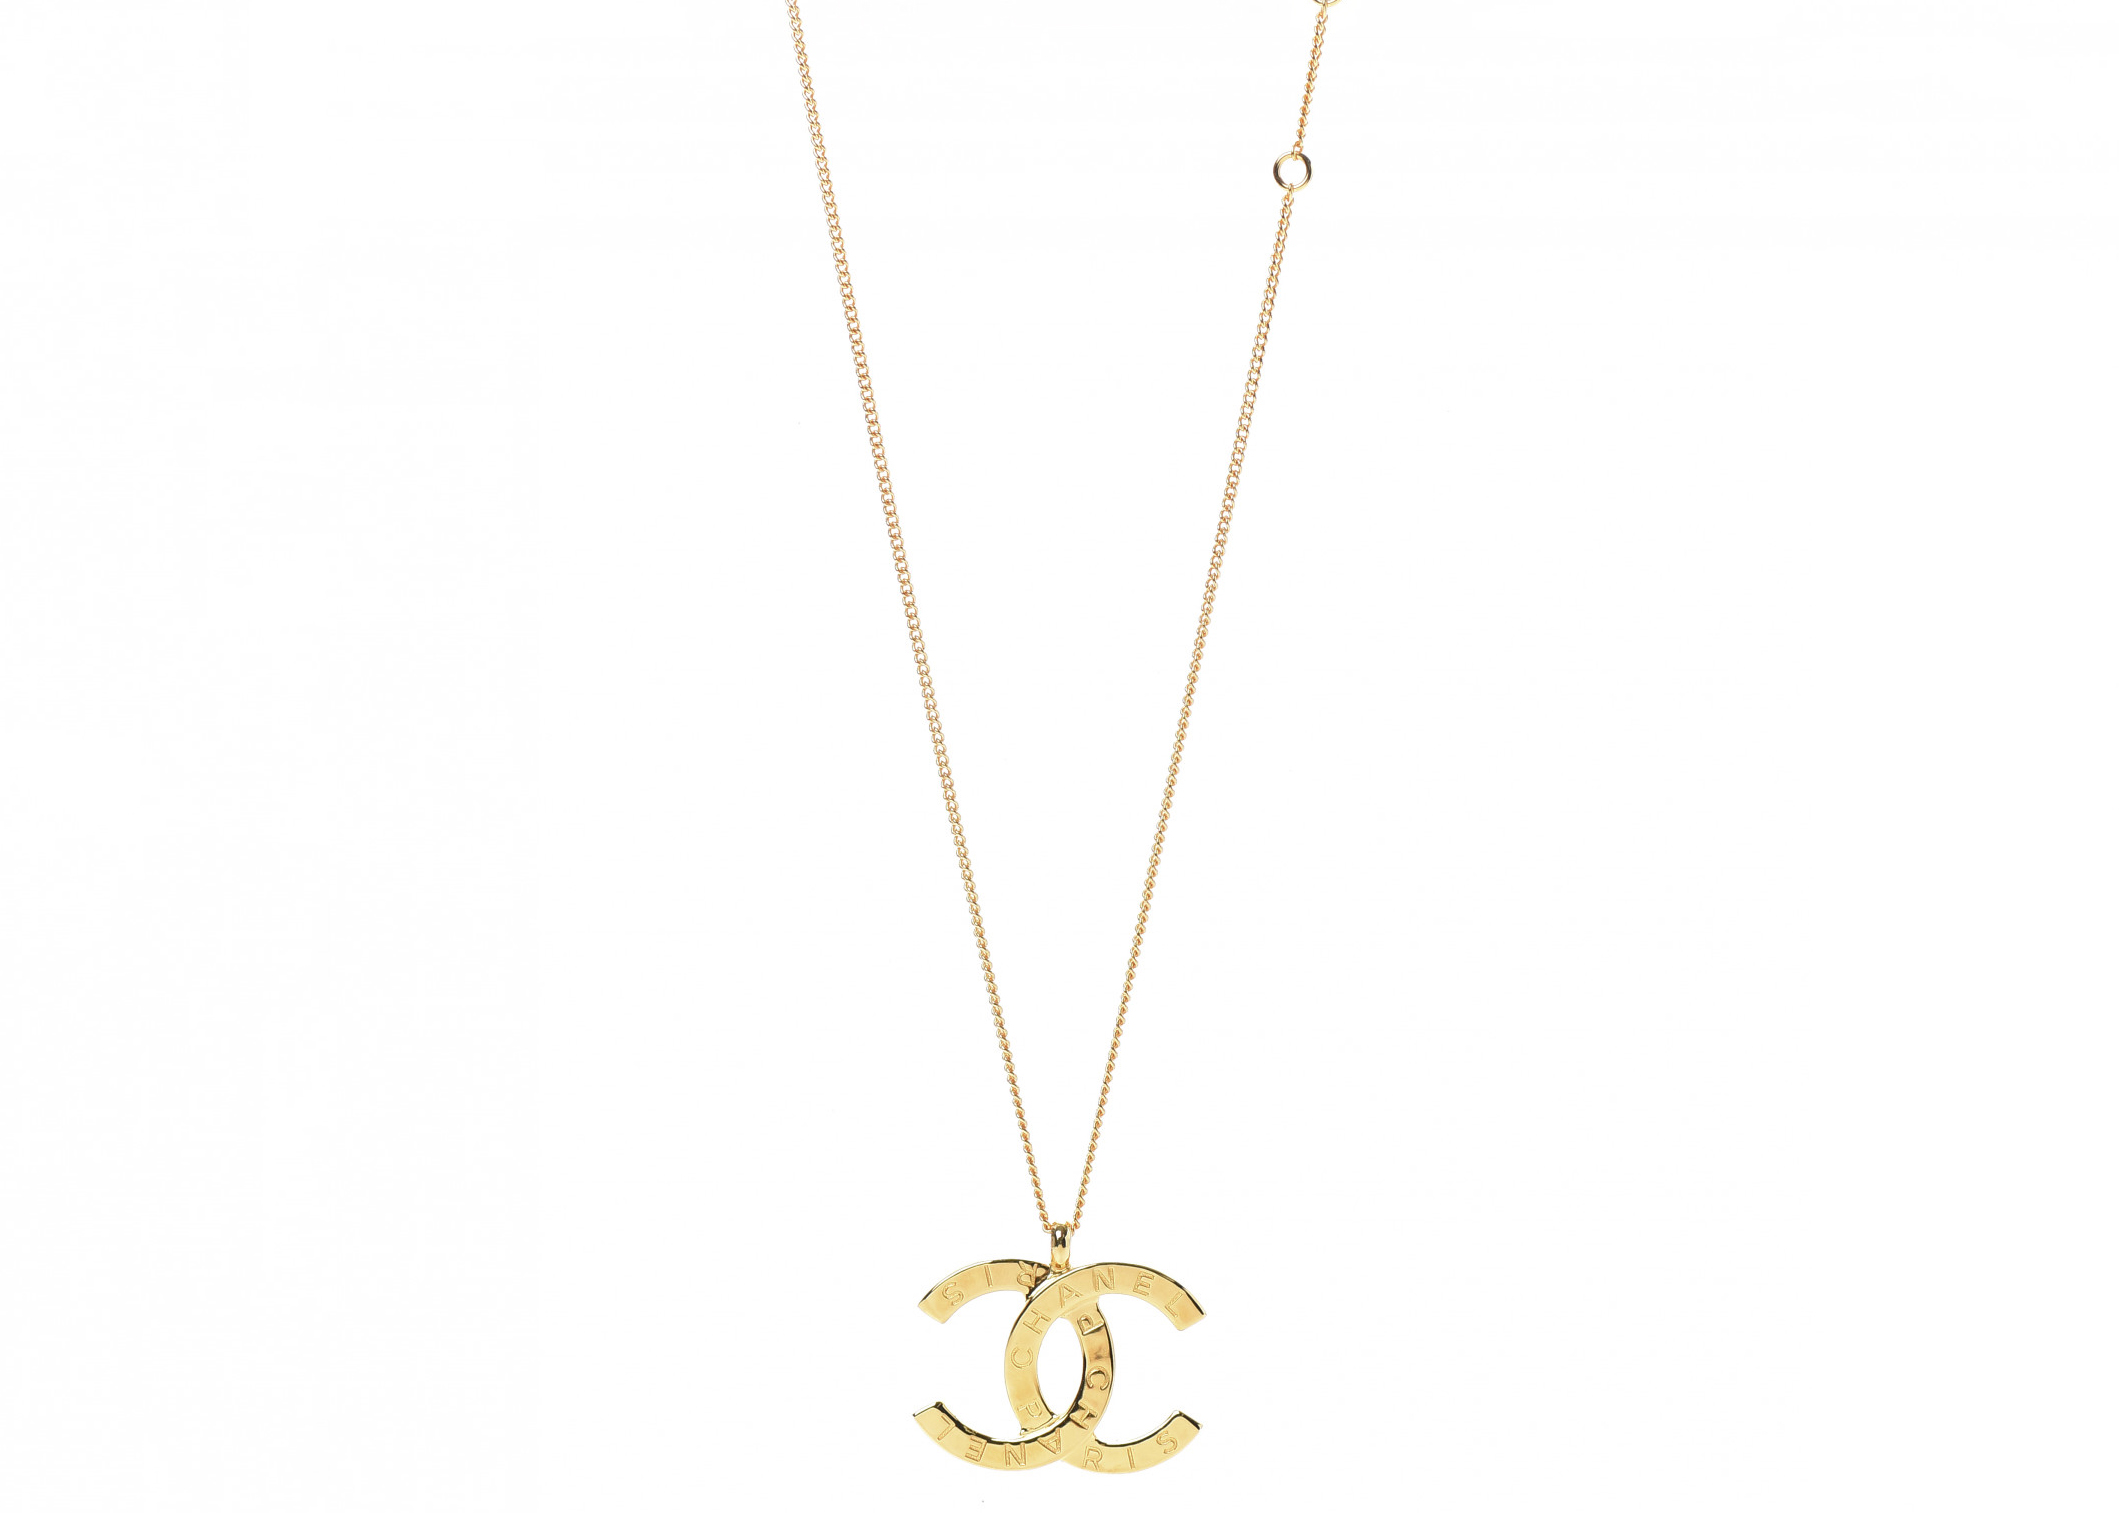 Chanel CC necklace – Beccas Bags